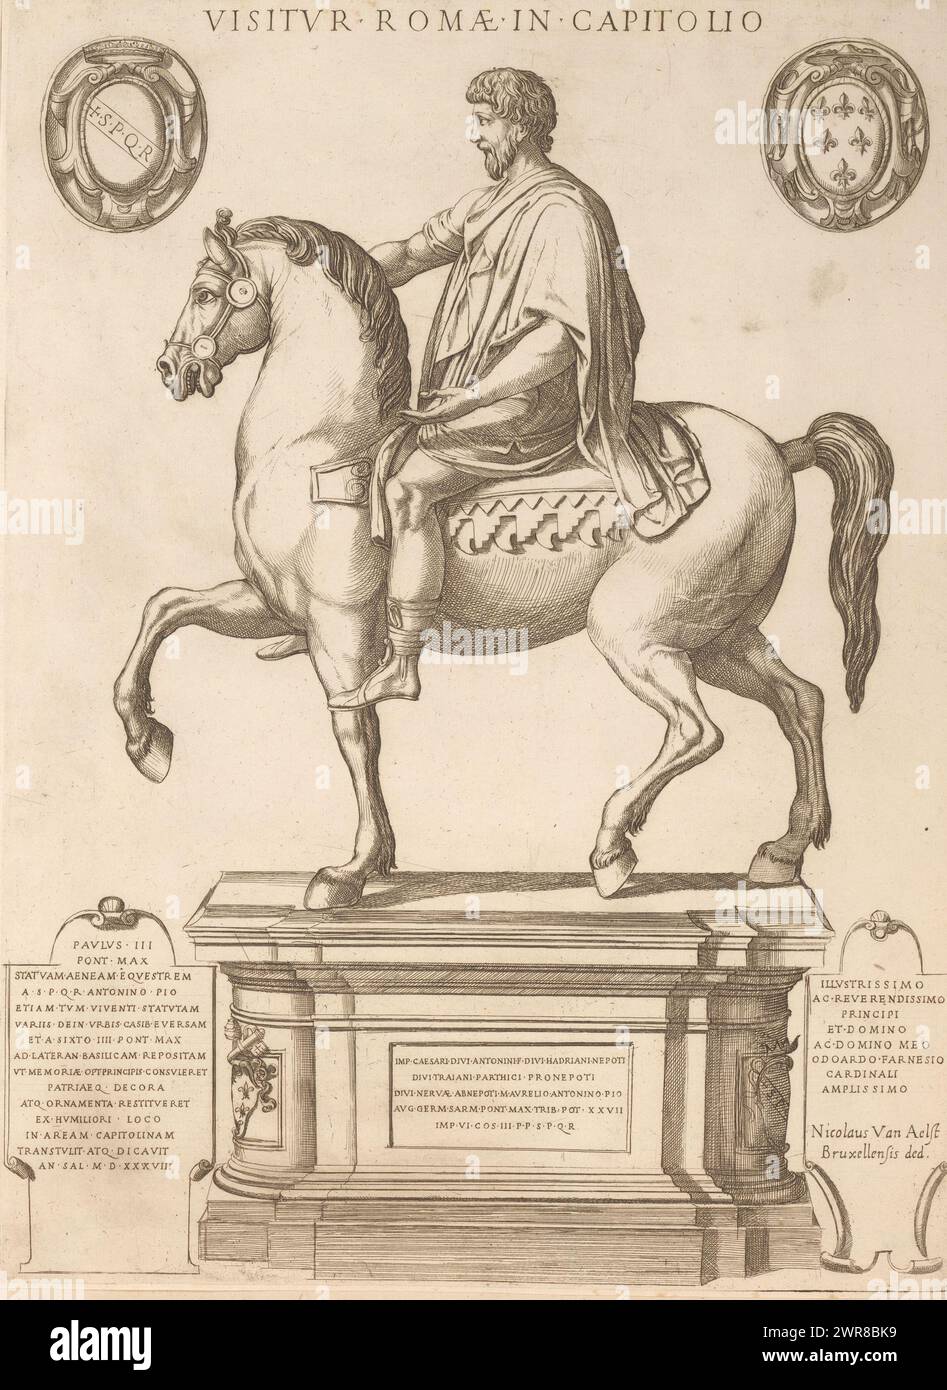 Statue of Marcus Aurelius, Visitur Romae in Capitolio (title on object), Speculum Romanae Magnificentiae (series title), Statue of Marcus Aurelius on horseback, on the Capitoline Hill in Rome. Print is part of an album., print maker: anonymous, publisher: Nicolaus van Aelst, Nicolaus van Aelst, Italy, c. 1537 - 1613, paper, etching, height 463 mm × width 339 mm, print Stock Photo